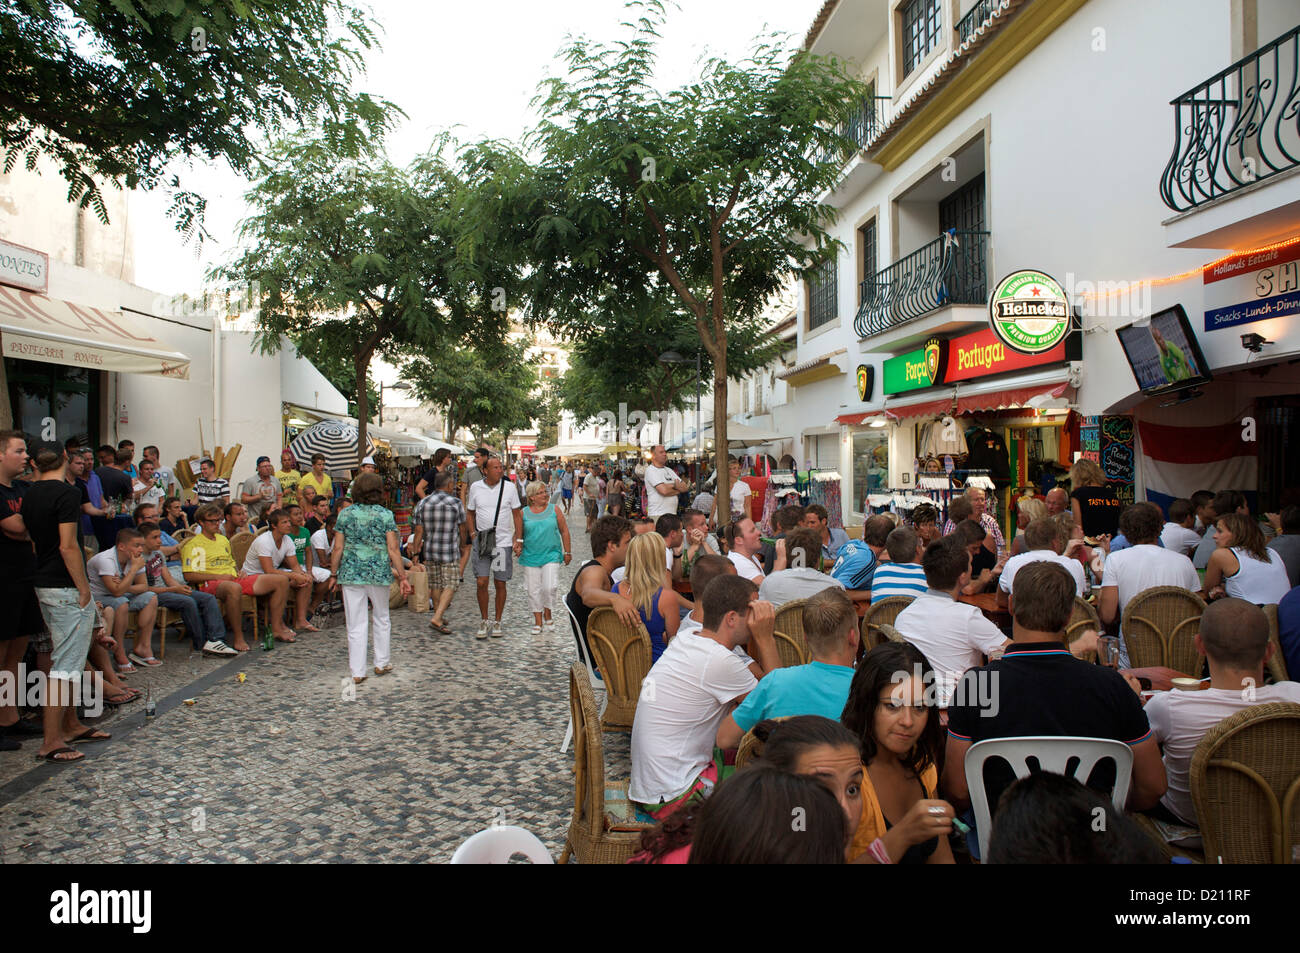 Many people on the street and in restaurants in the evening, Albufeira, Algarve, Portugal, Europe Stock Photo